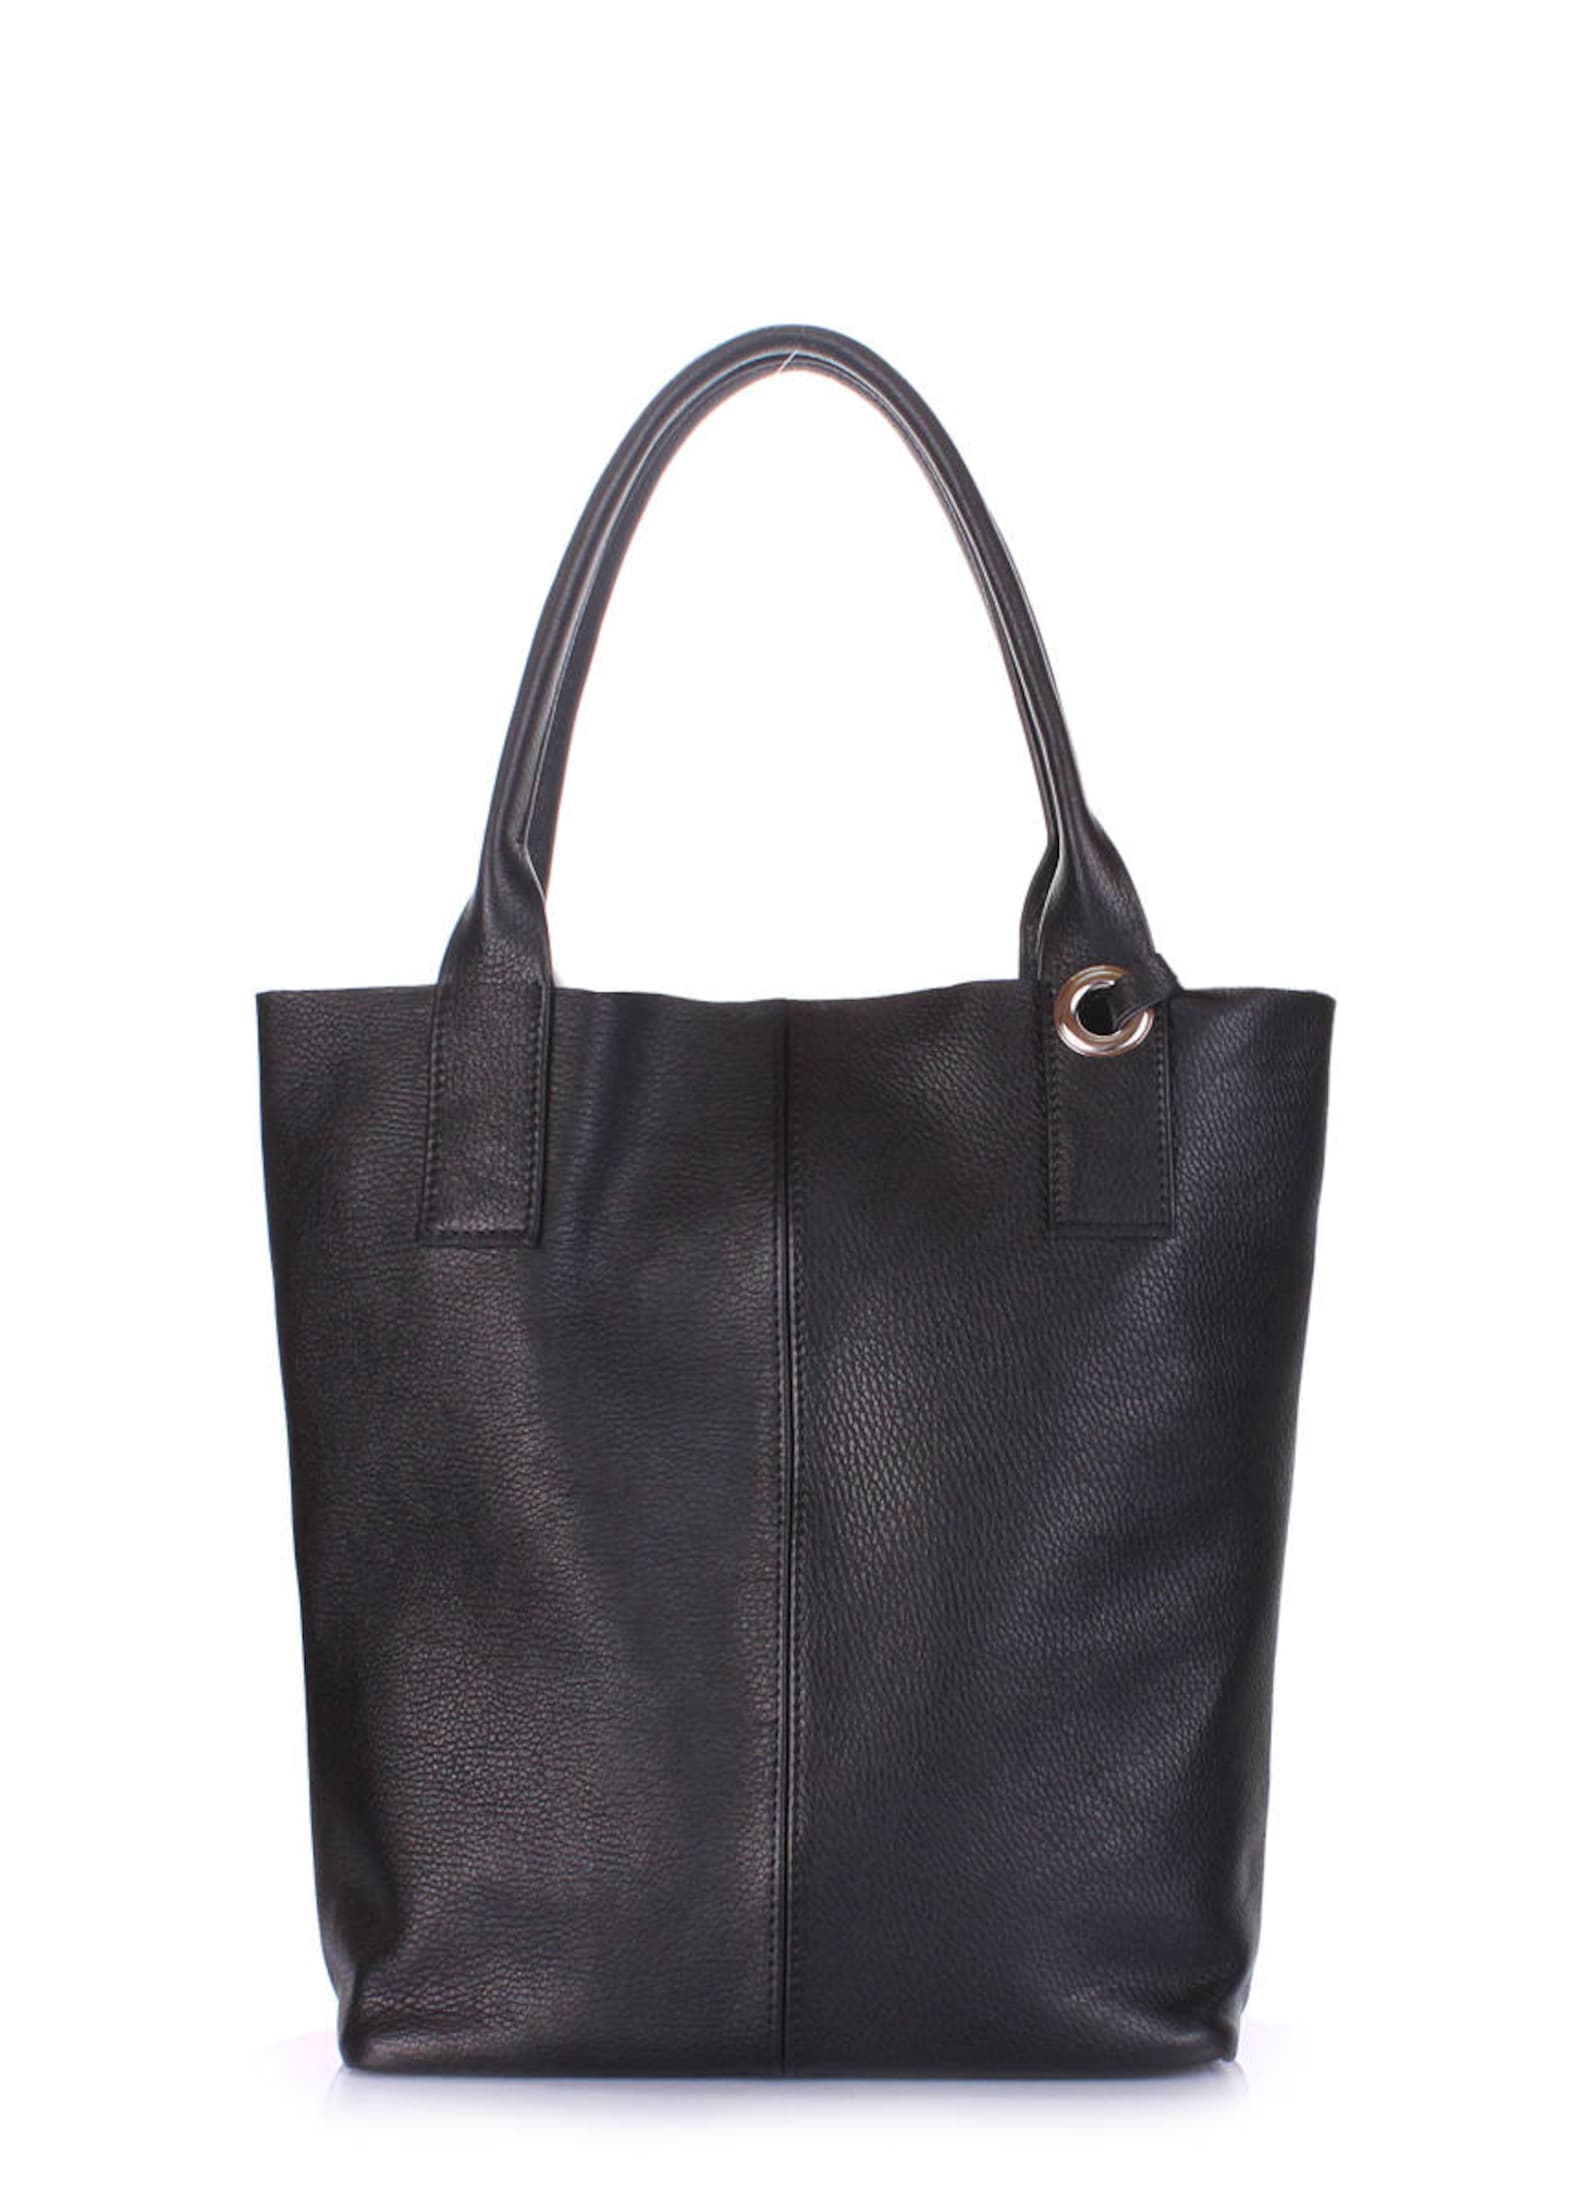 Silver Leather Tote Bag Leather Bag Silver Tote Women Tote - Etsy